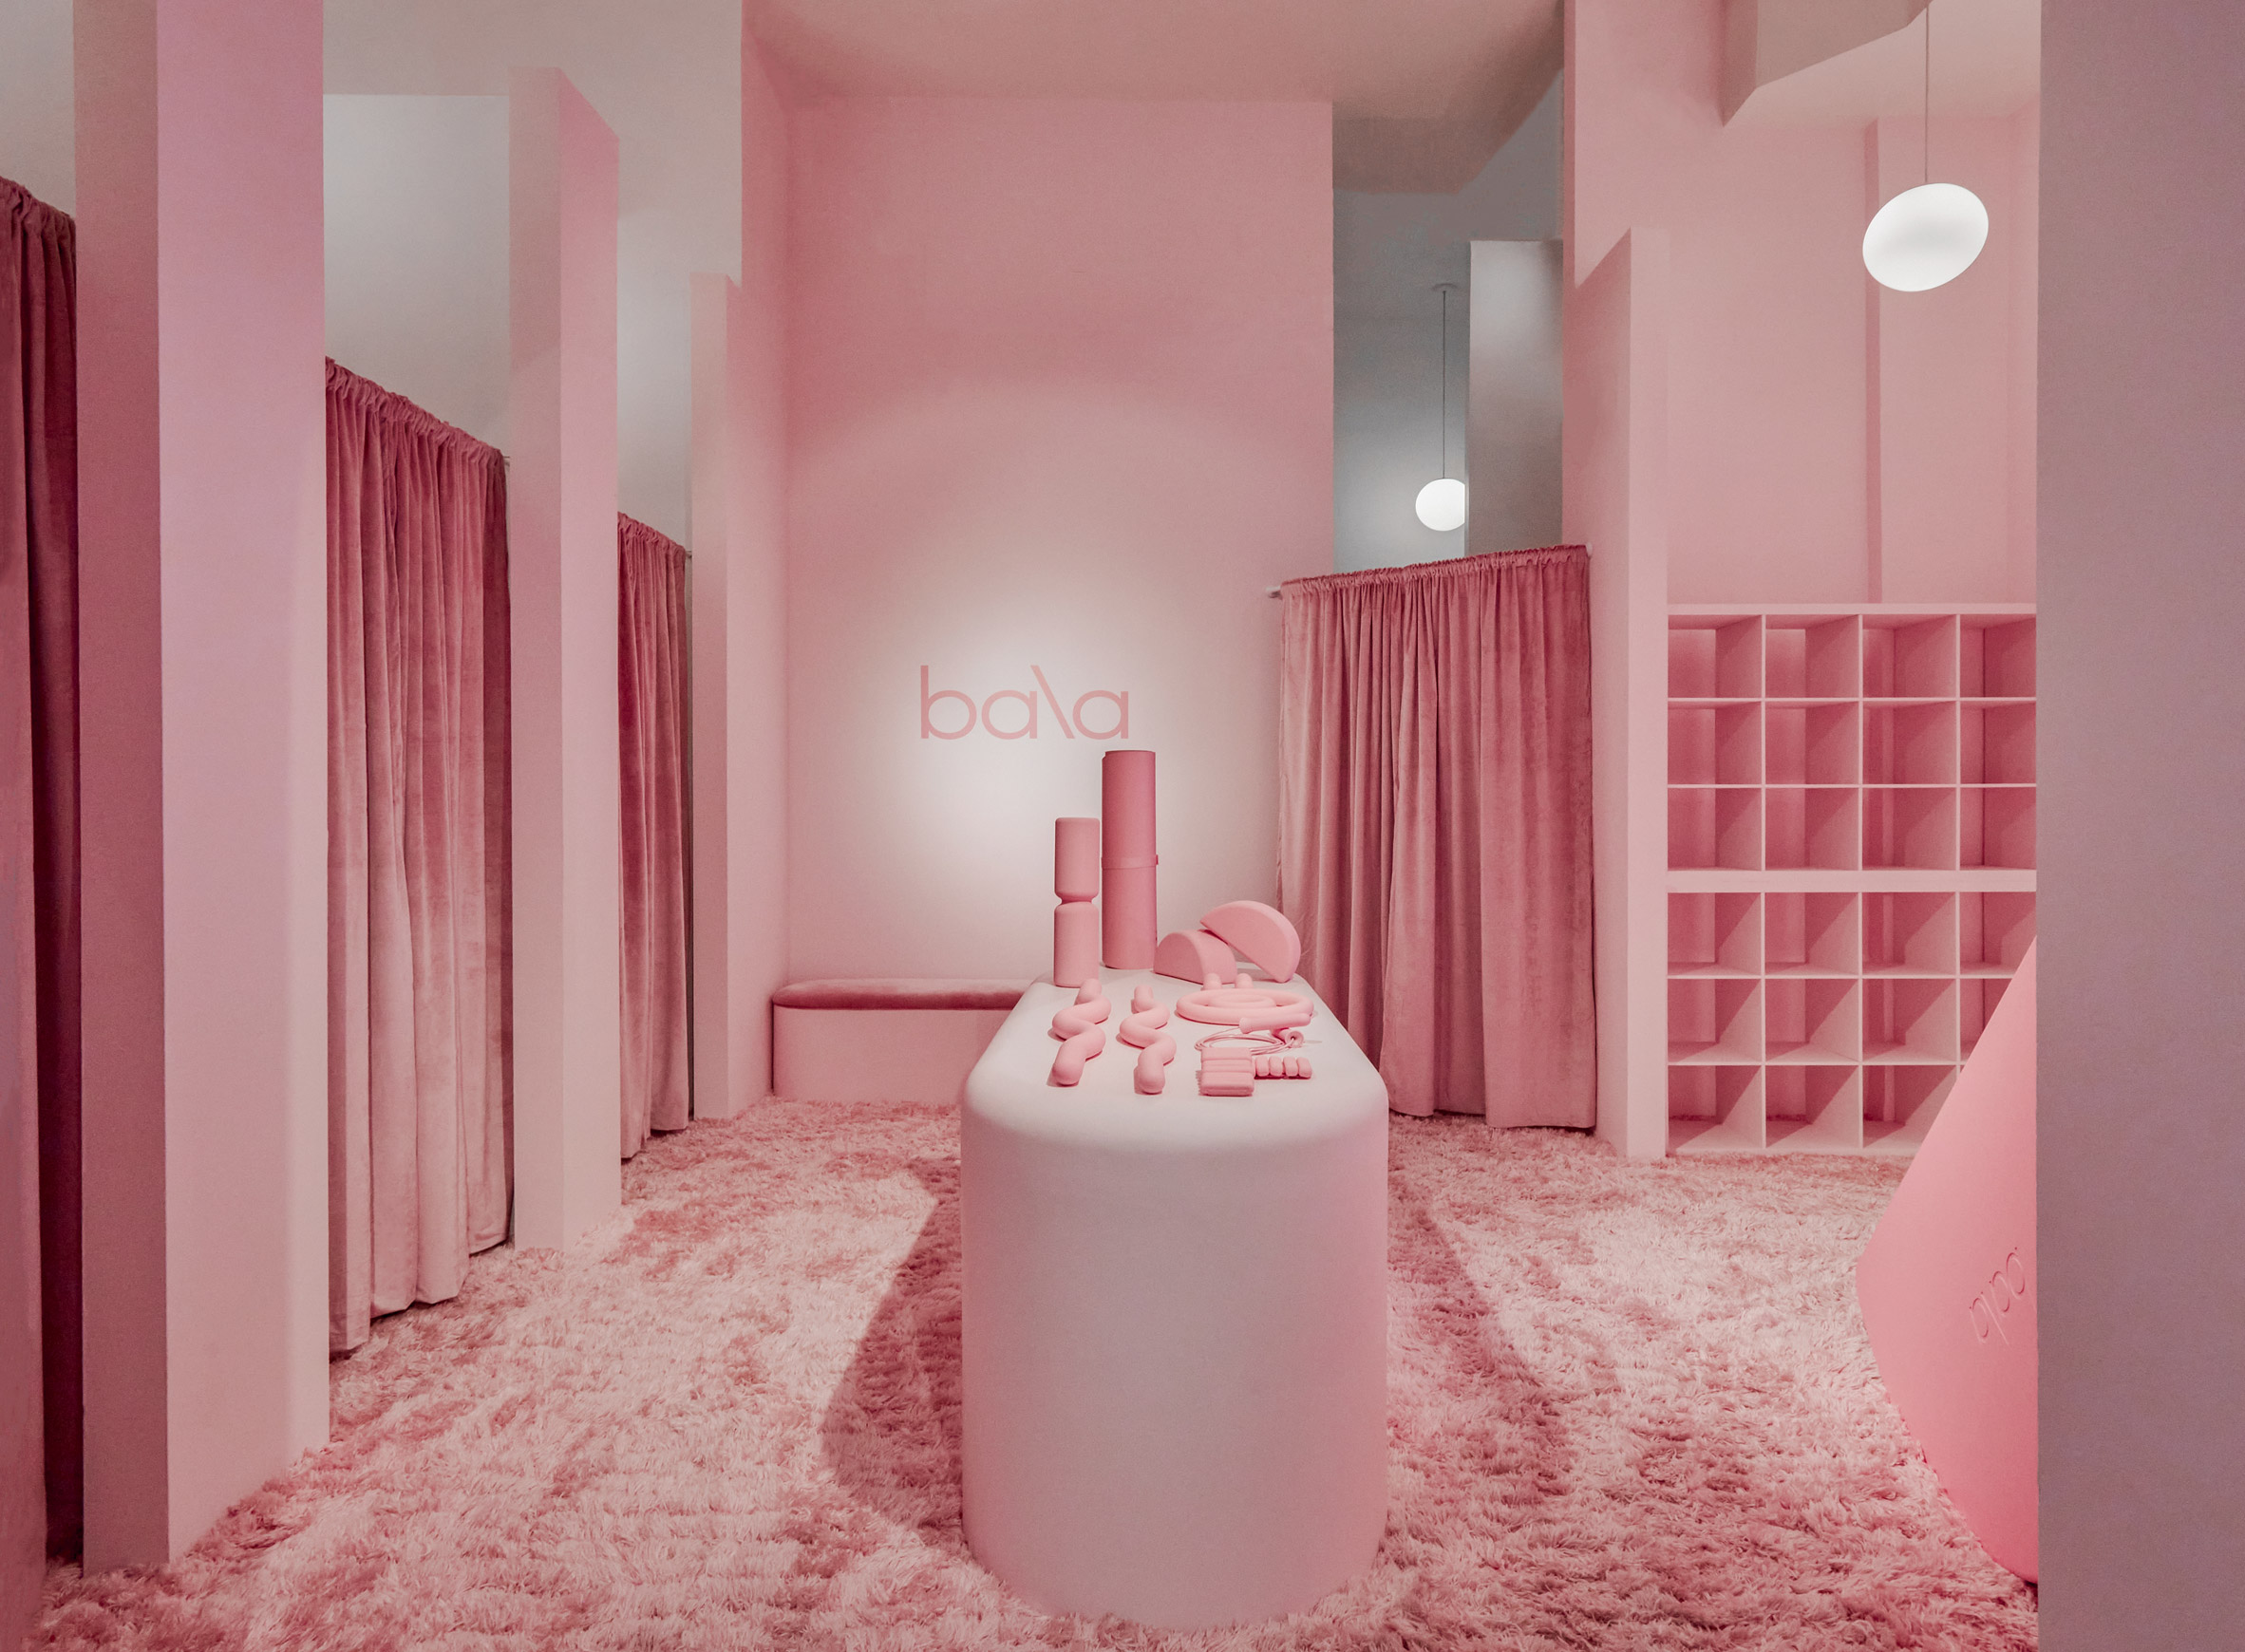 Entirely pink room